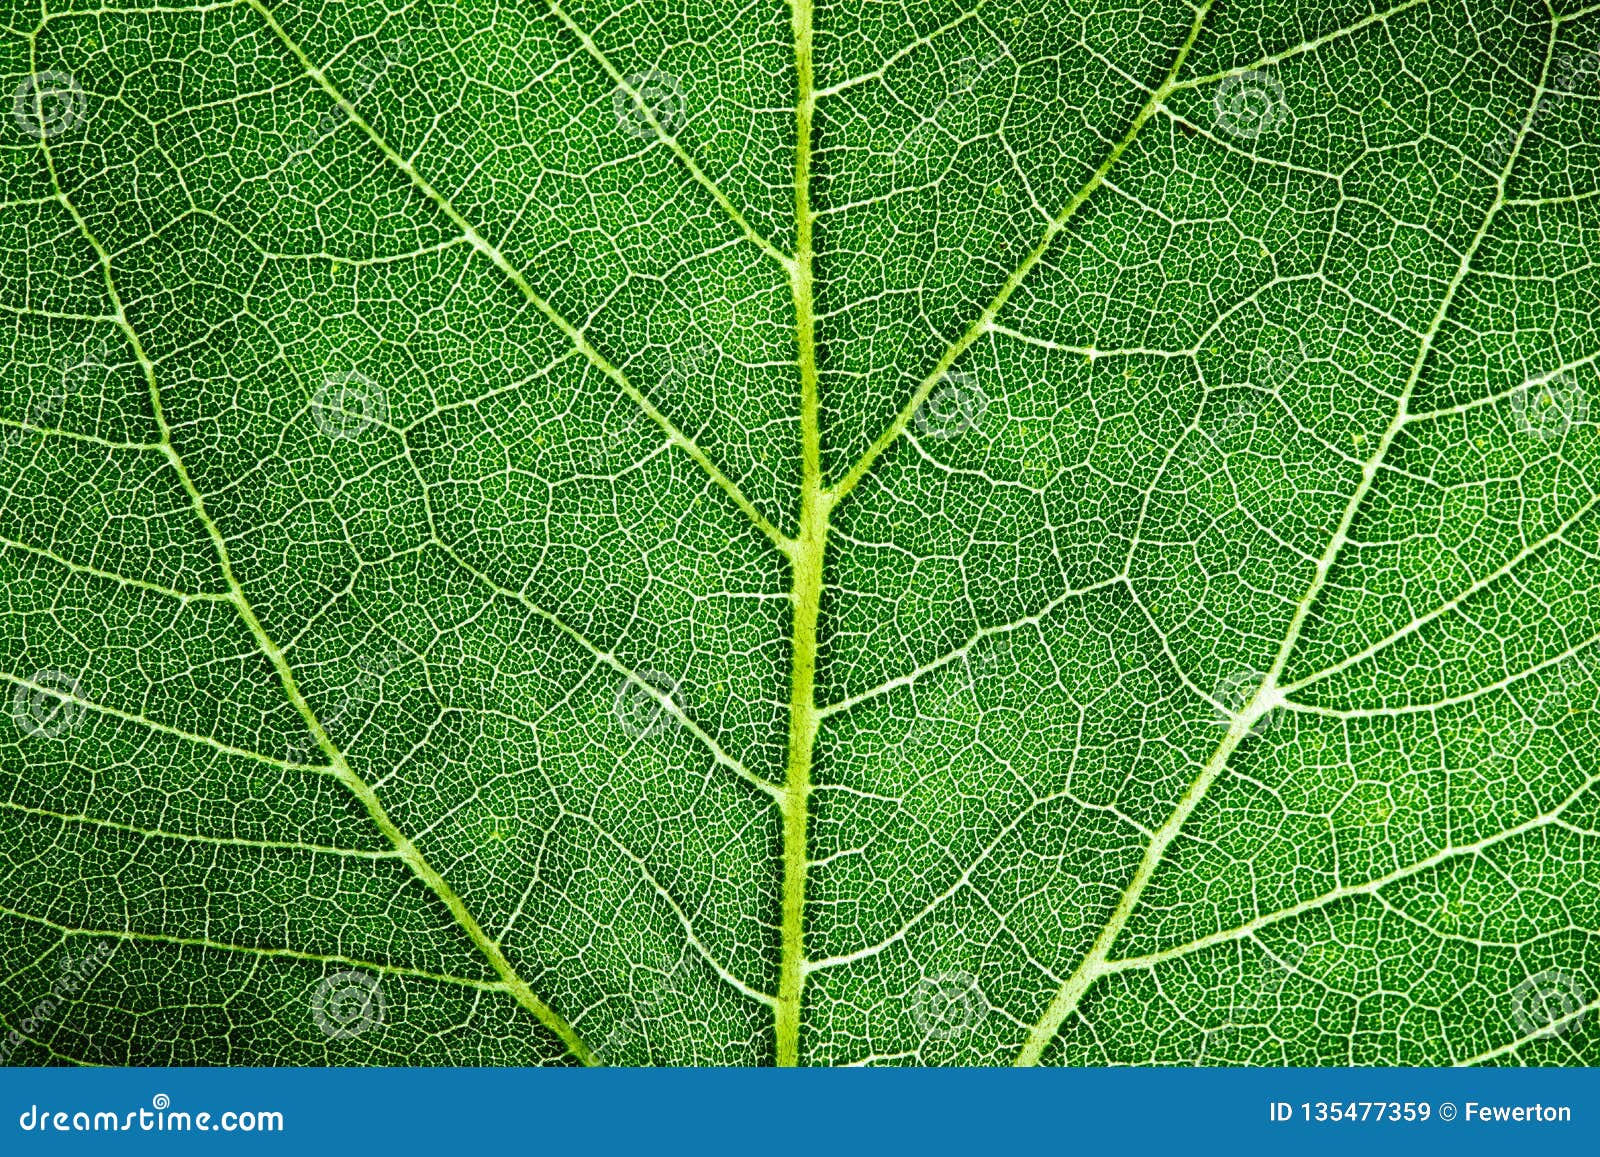 green leaf fresh detailed rugged surface structure extreme macro closeup photo with midrib, leaf veins grooves biology background